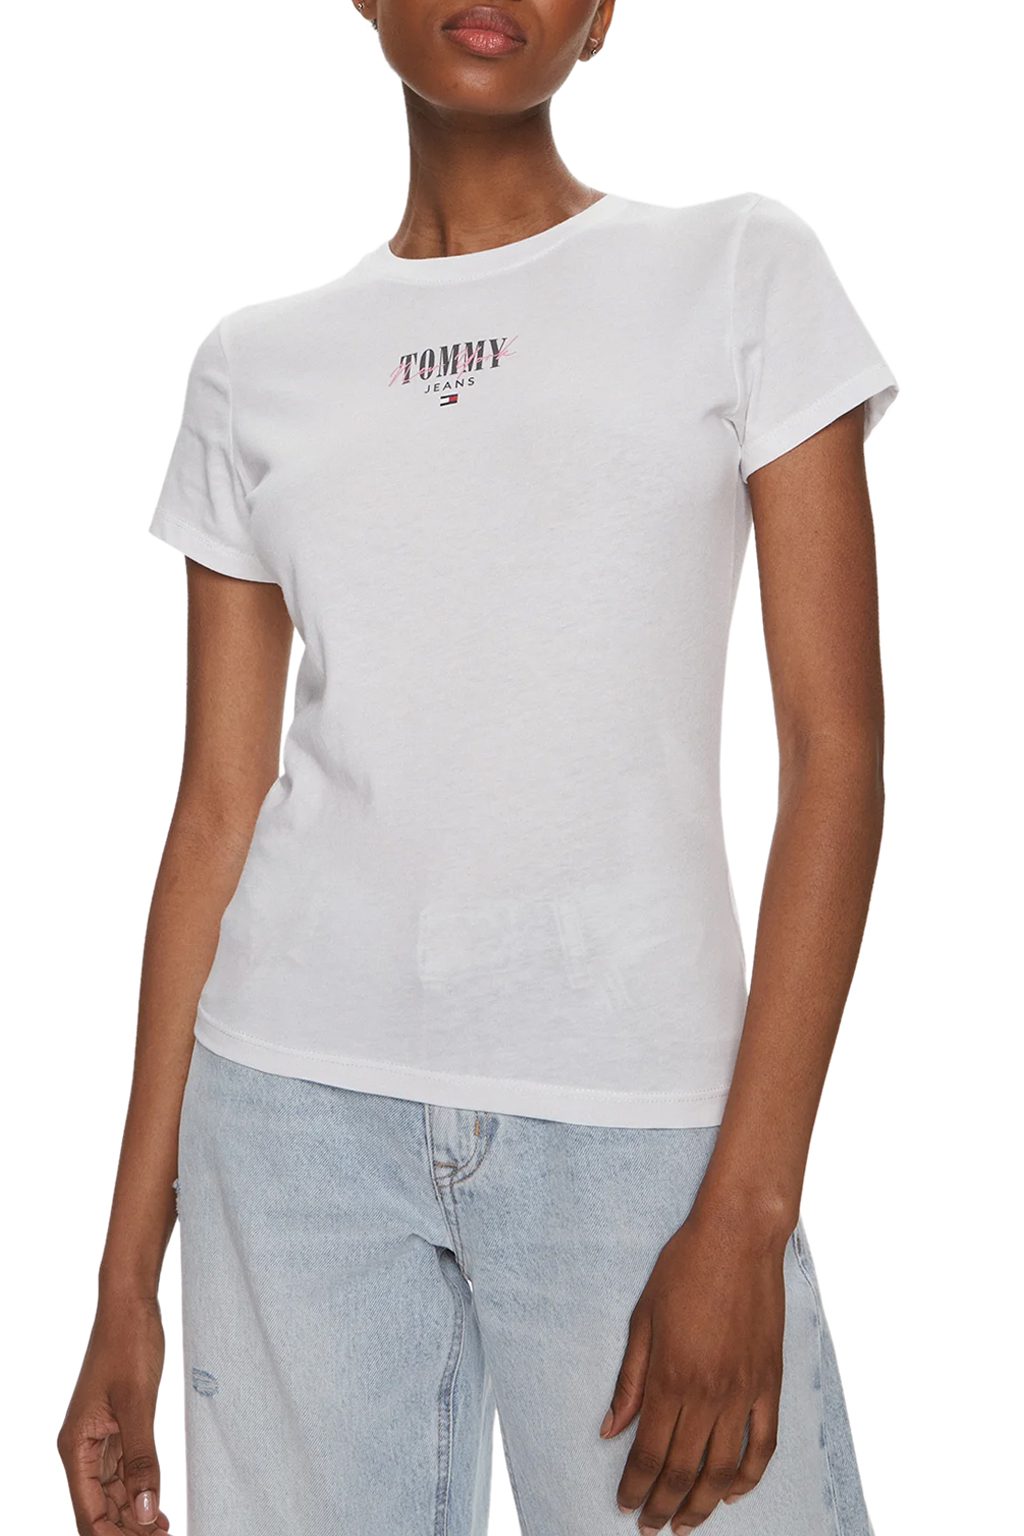 TOMMY JEANS Slim essential logo 1 tee ext